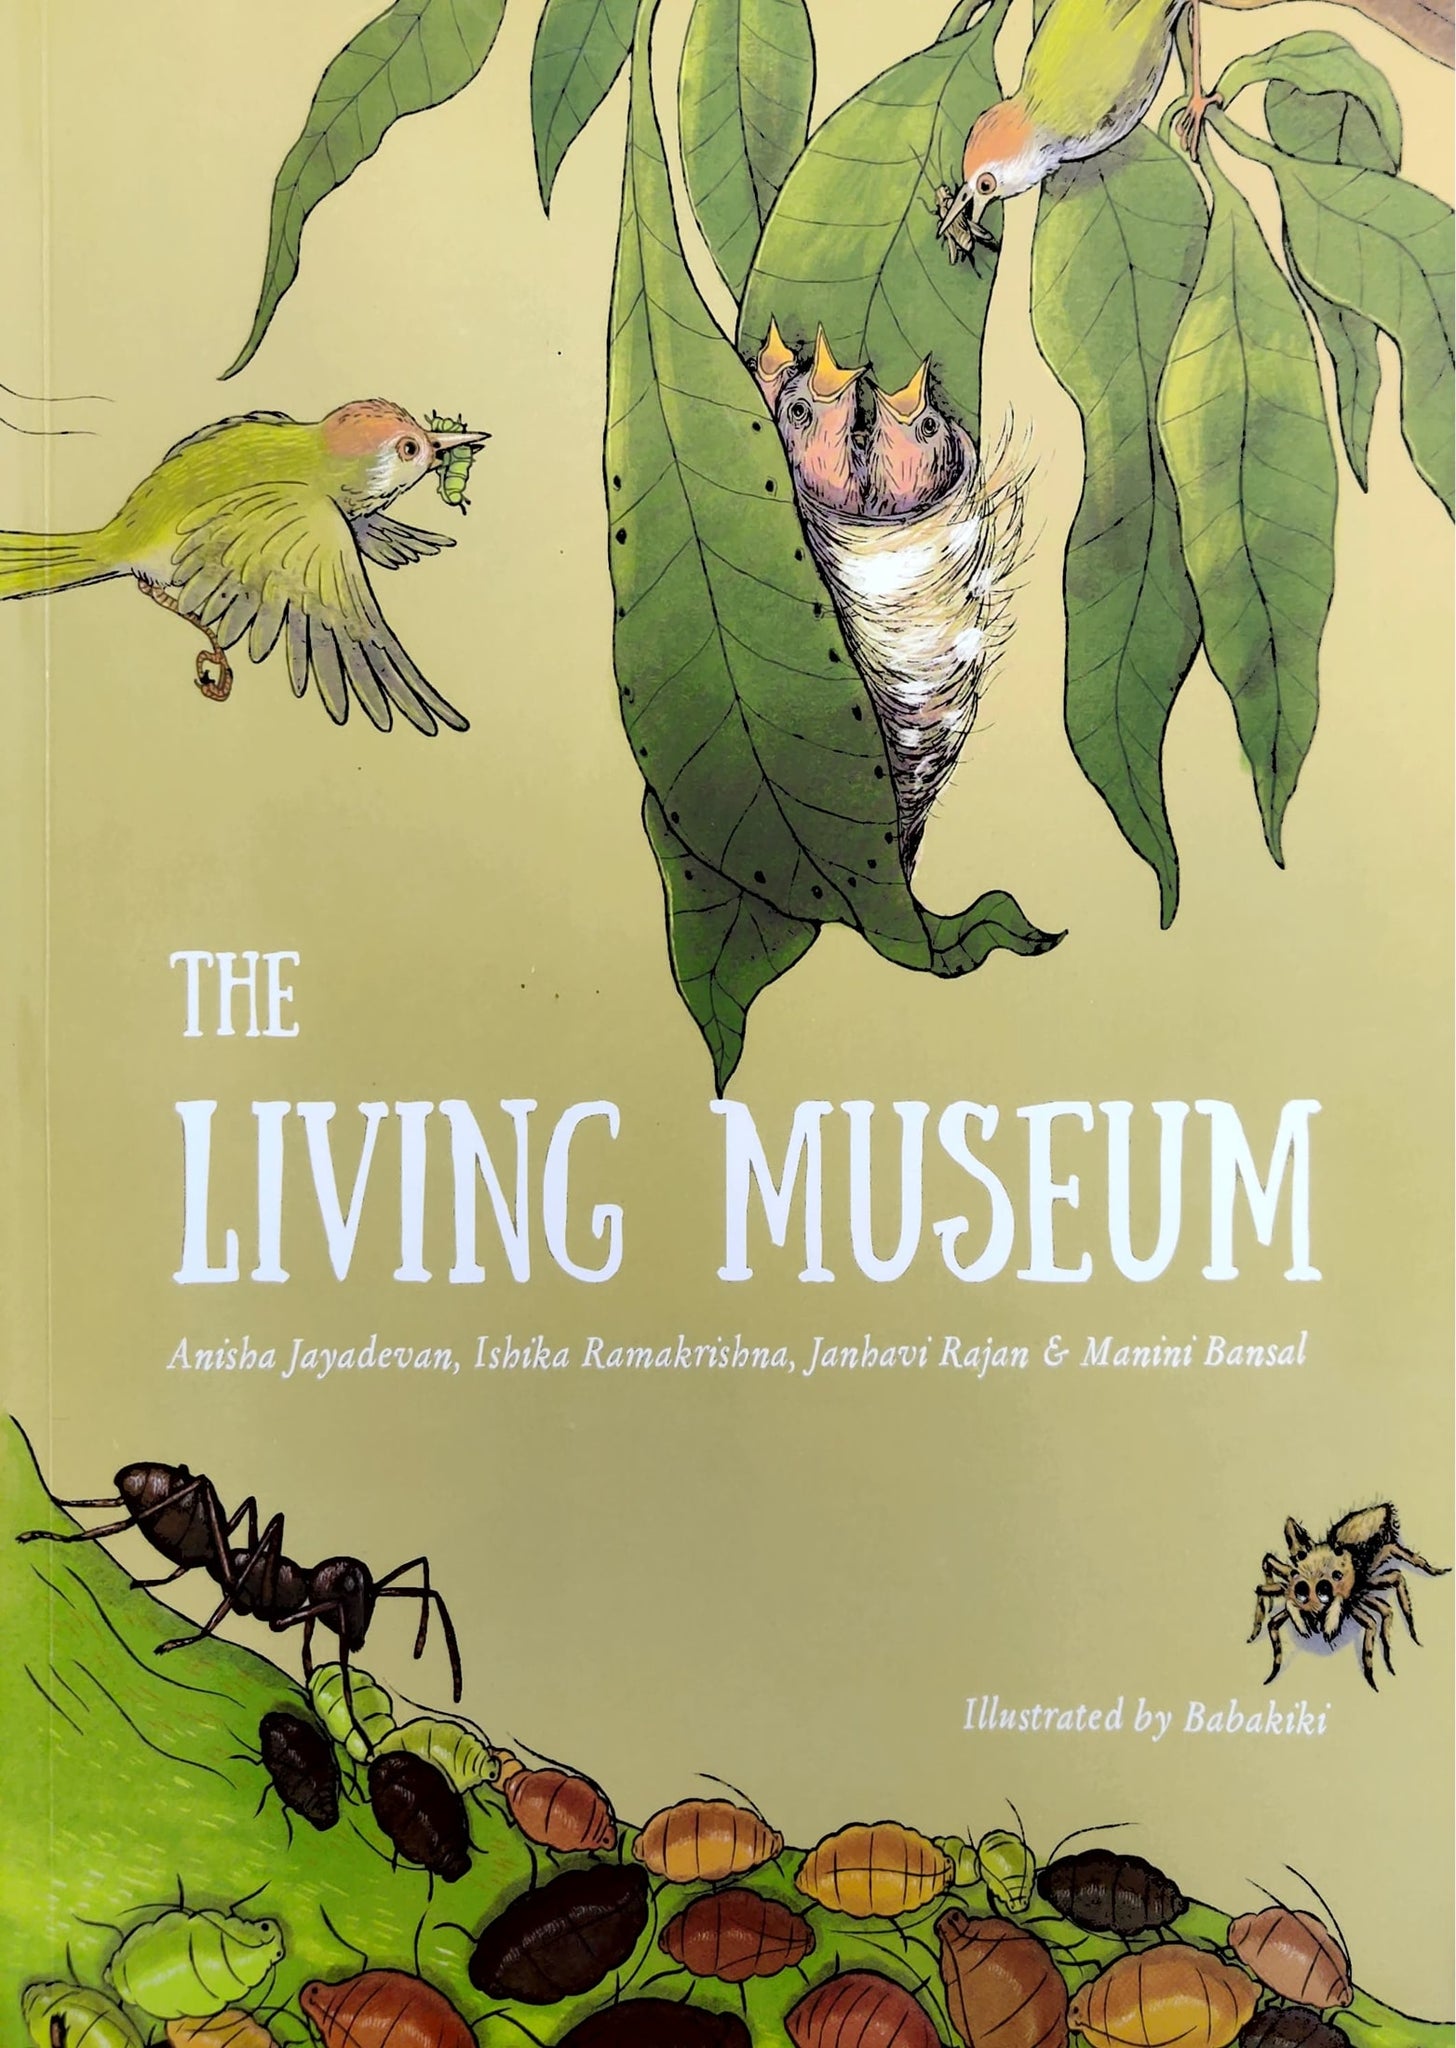 The Living Museum